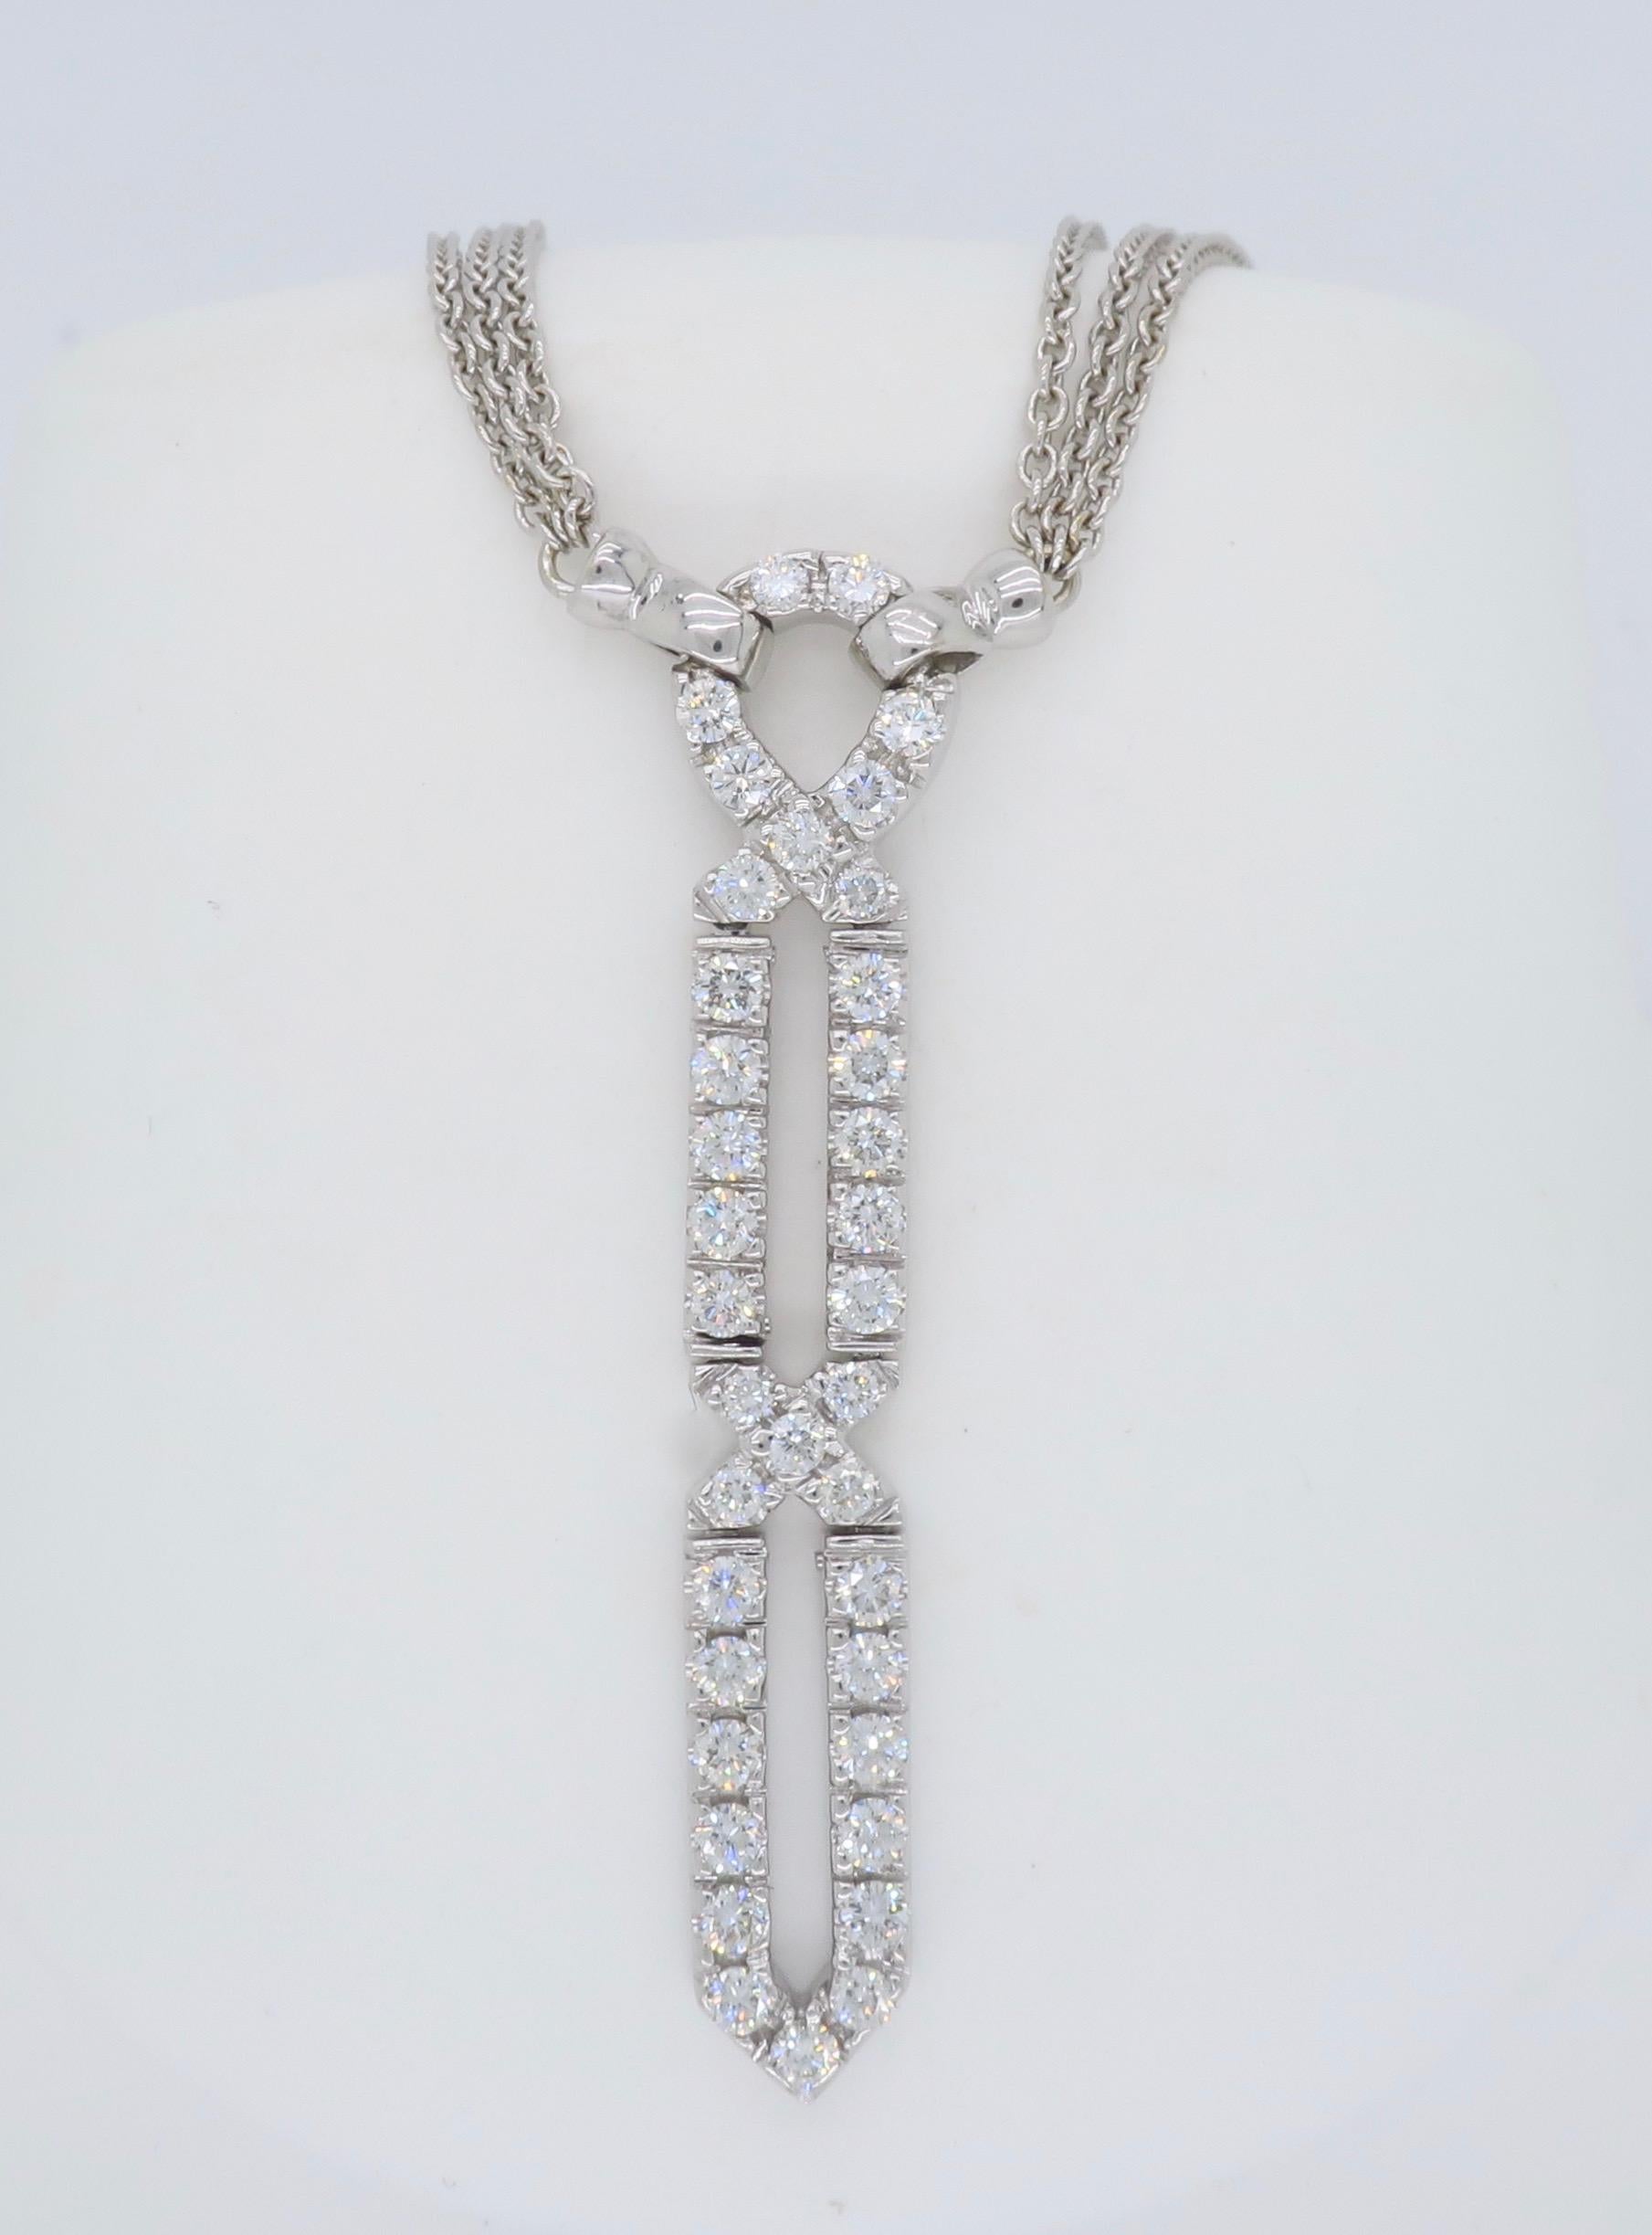 Triple stranded diamond drop pendant necklace crafted in 18k white gold.

Diamond Carat Weight: Approximately .99CTW
Diamond Cut: Round Brilliant Cut
Color: Average G-I
Clarity: Average VS
Metal: 18K White Gold
Pendant Length: Approximately 1.75”